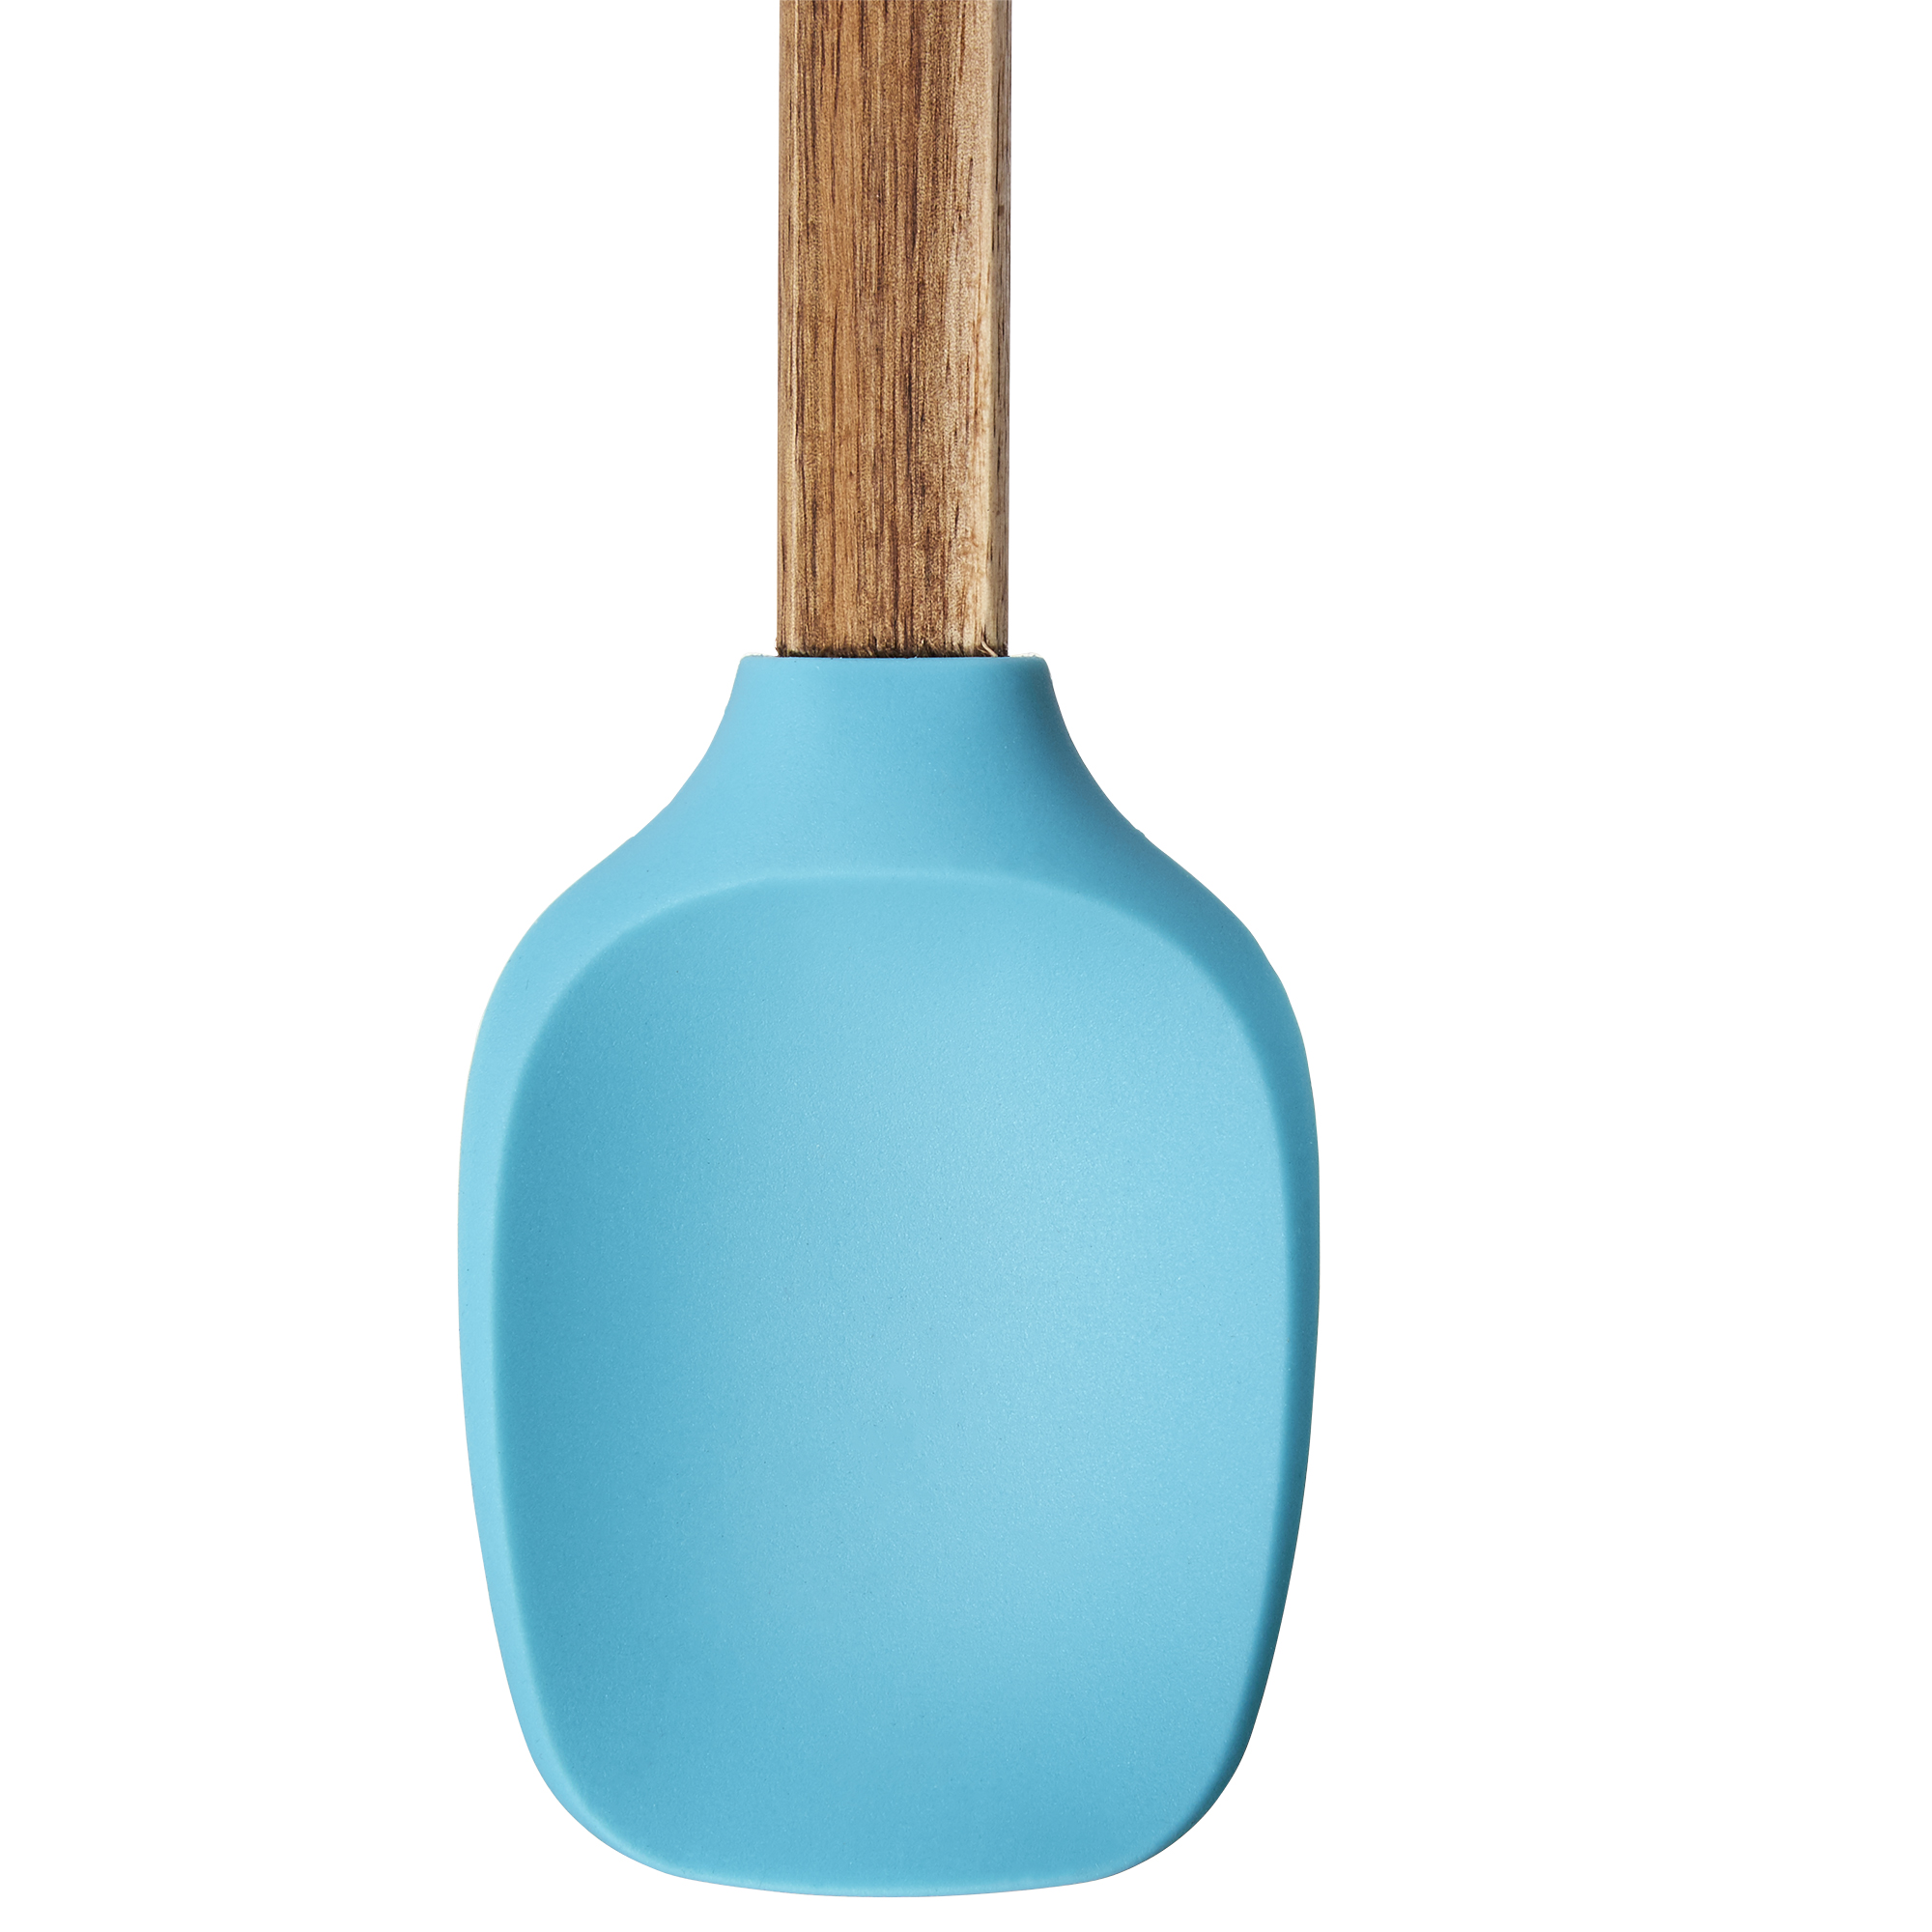 The Pioneer Woman 4-Piece Silicone Spatula Set with Acacia Wood Handles, Assorted Colors - image 3 of 12